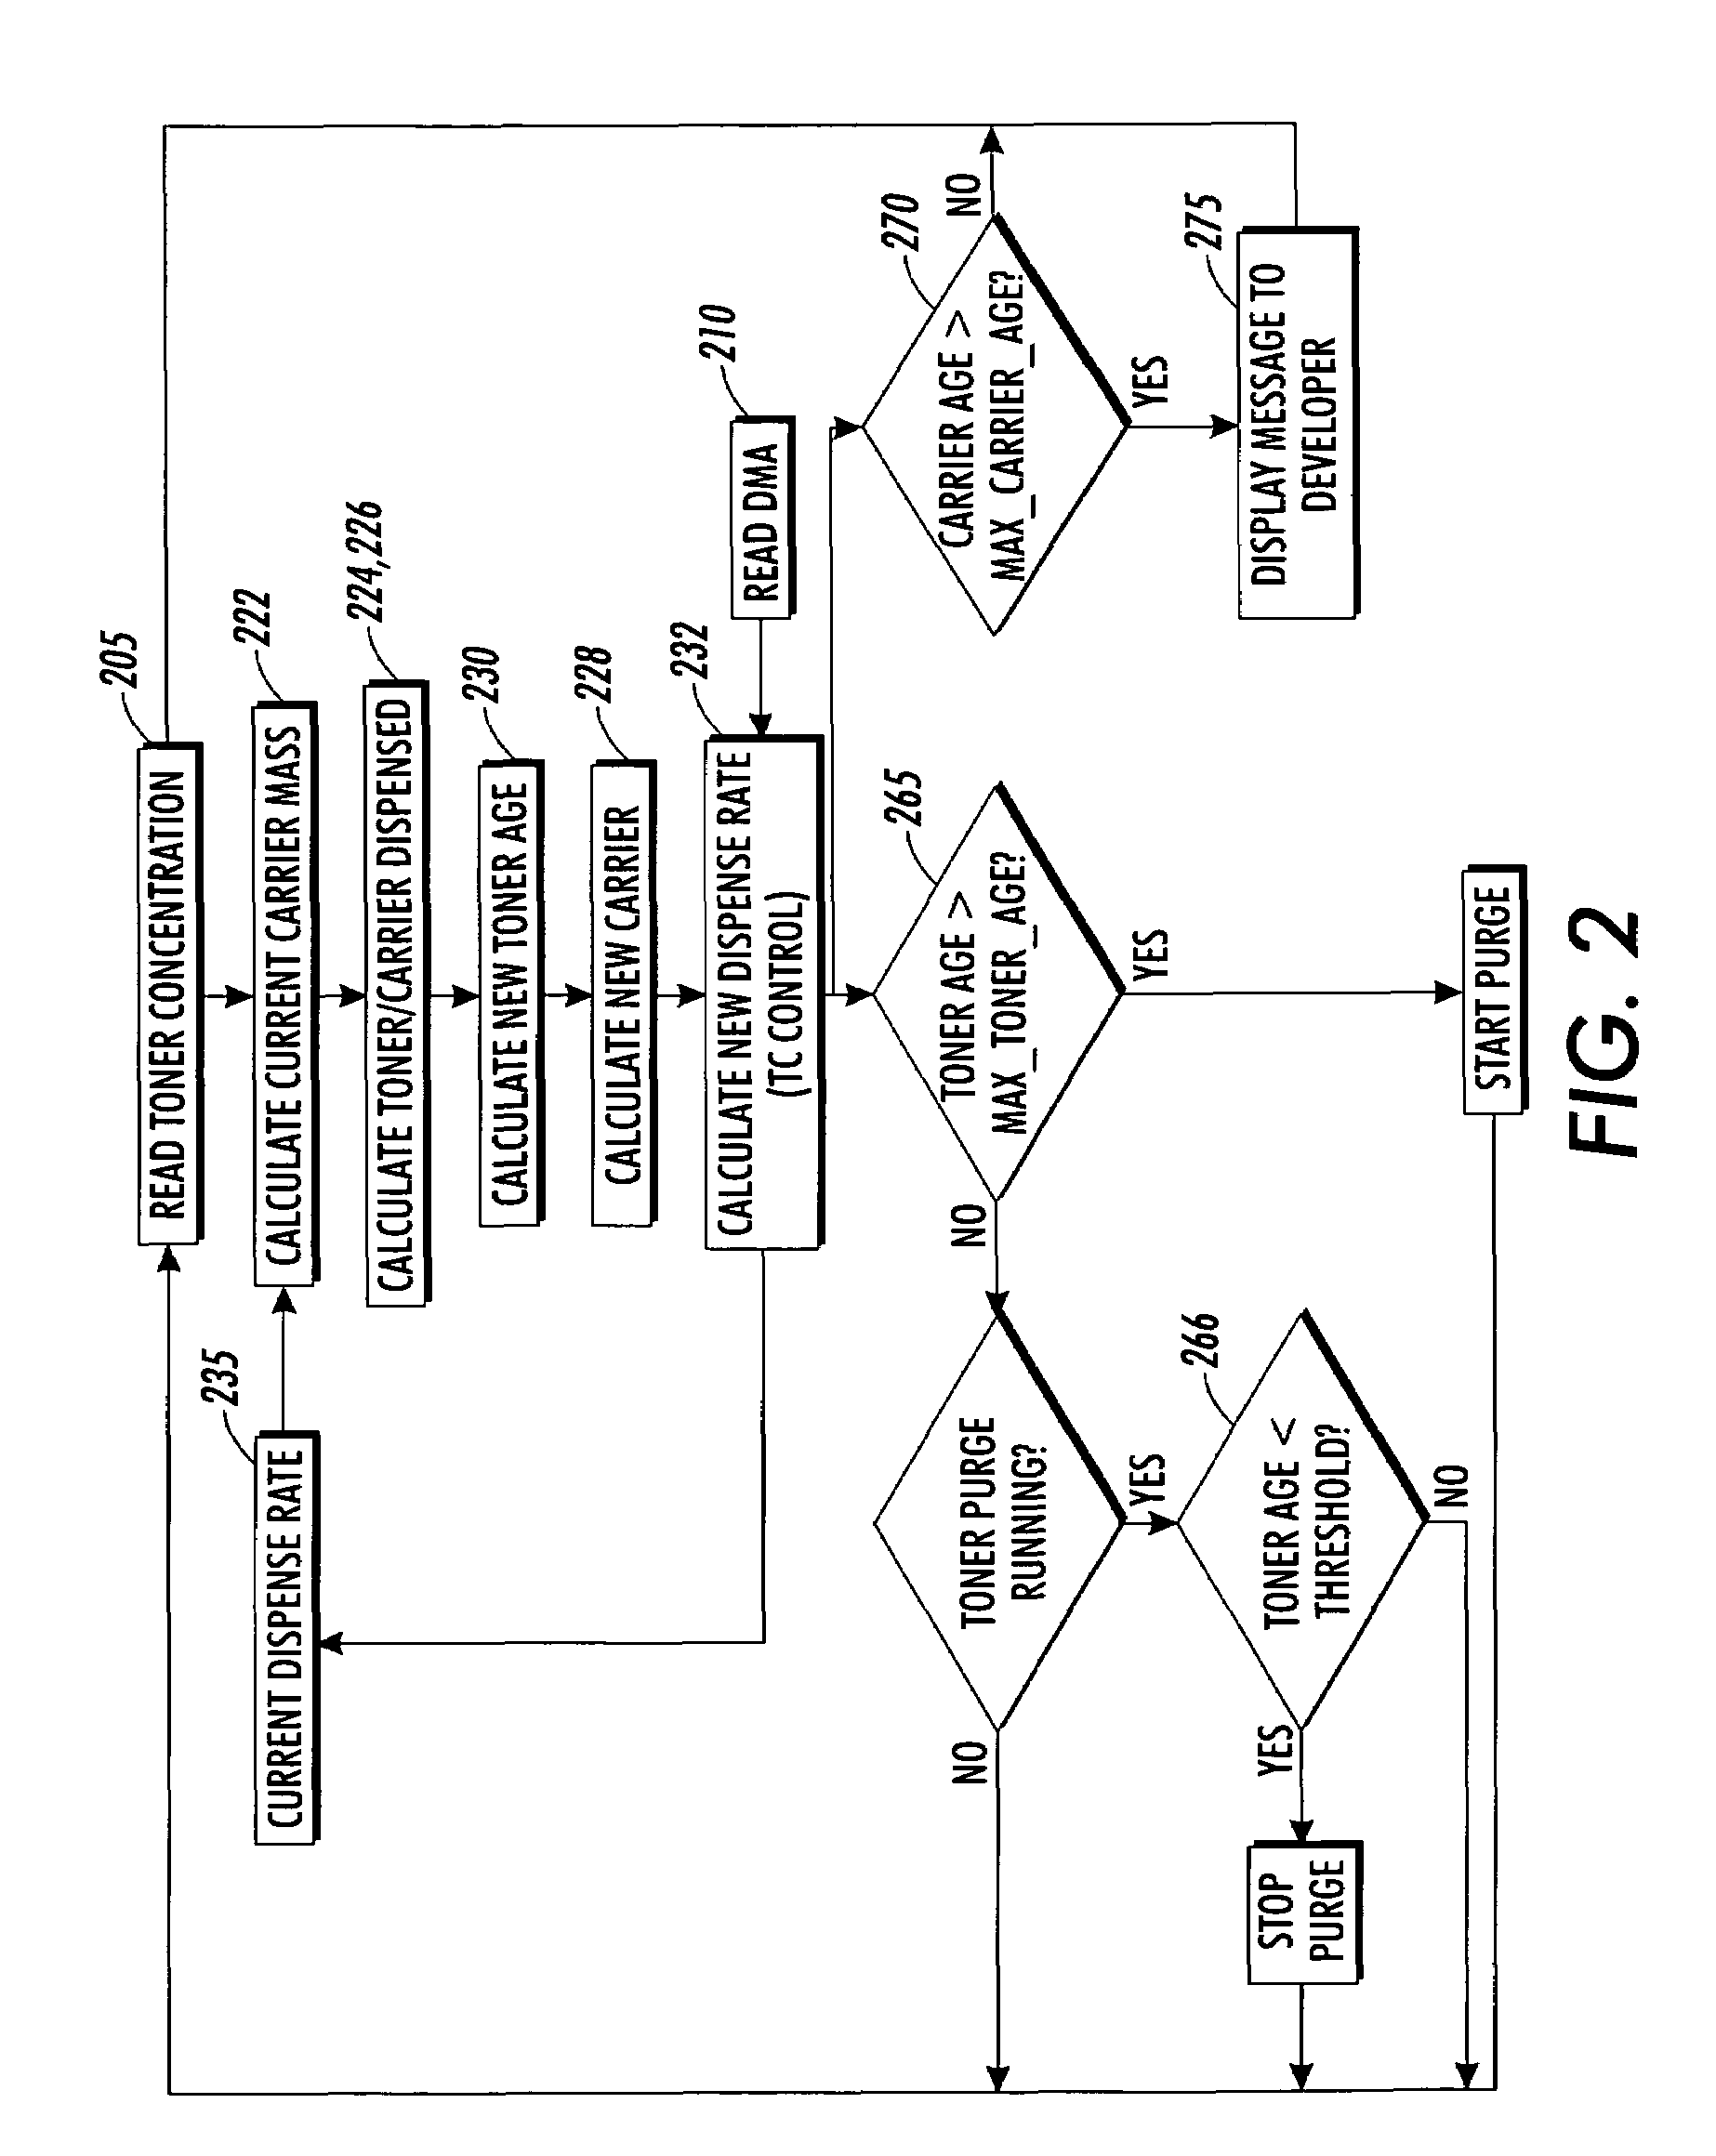 Method for calculating toner age and a method for calculating carrier age for use in print engine diagnostics